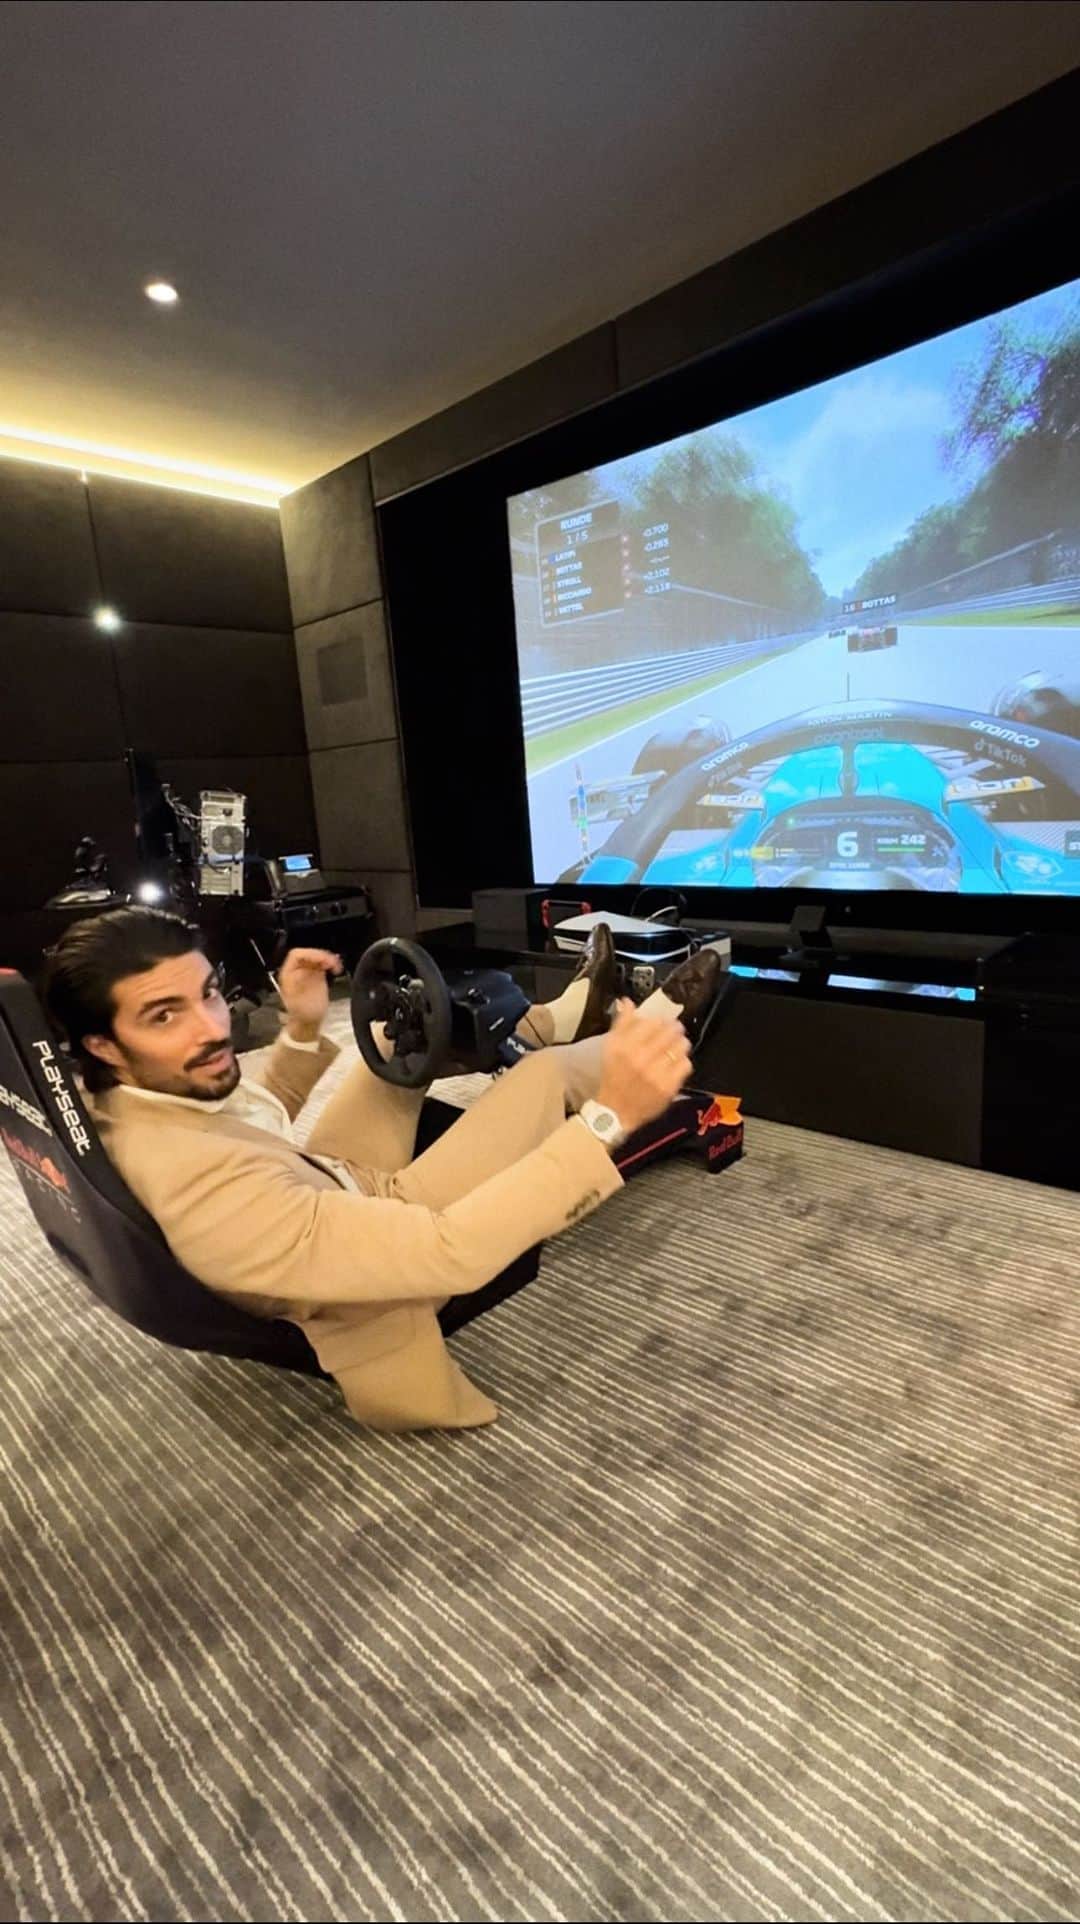 Mariano Di Vaioのインスタグラム：「From pixels to powder: Shifting gears in style! 🎮➡️🚗 Can you feel the thrill? Drop a comment with your favorite winter emoji! ❄️🔥 #SimulatorToSnow #DriftModeActivated」